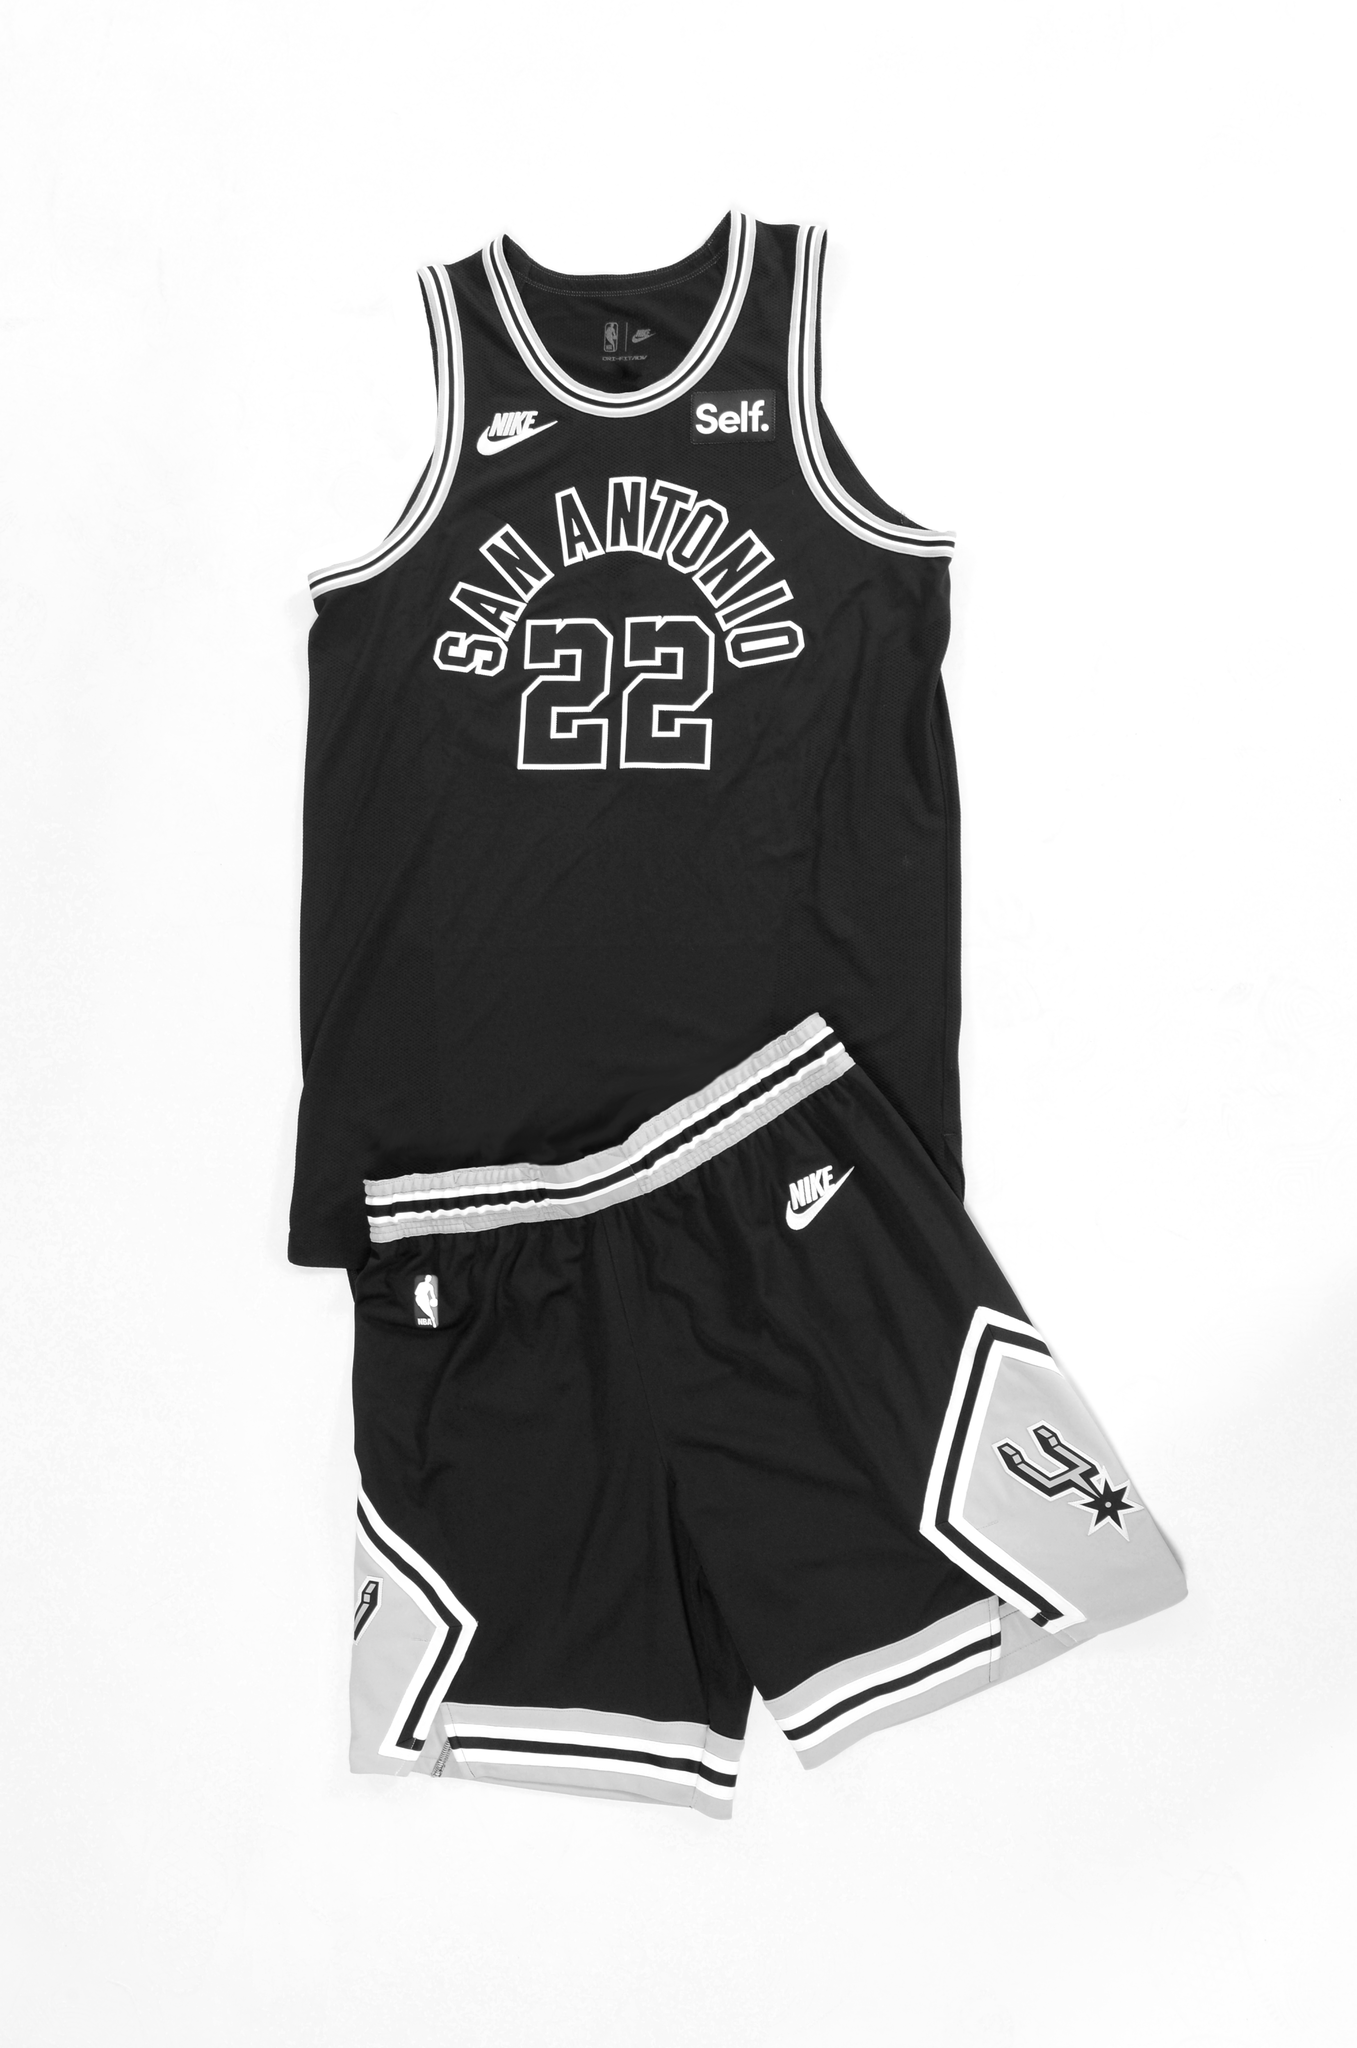 George Gervin, Spurs made a special jersey announcement